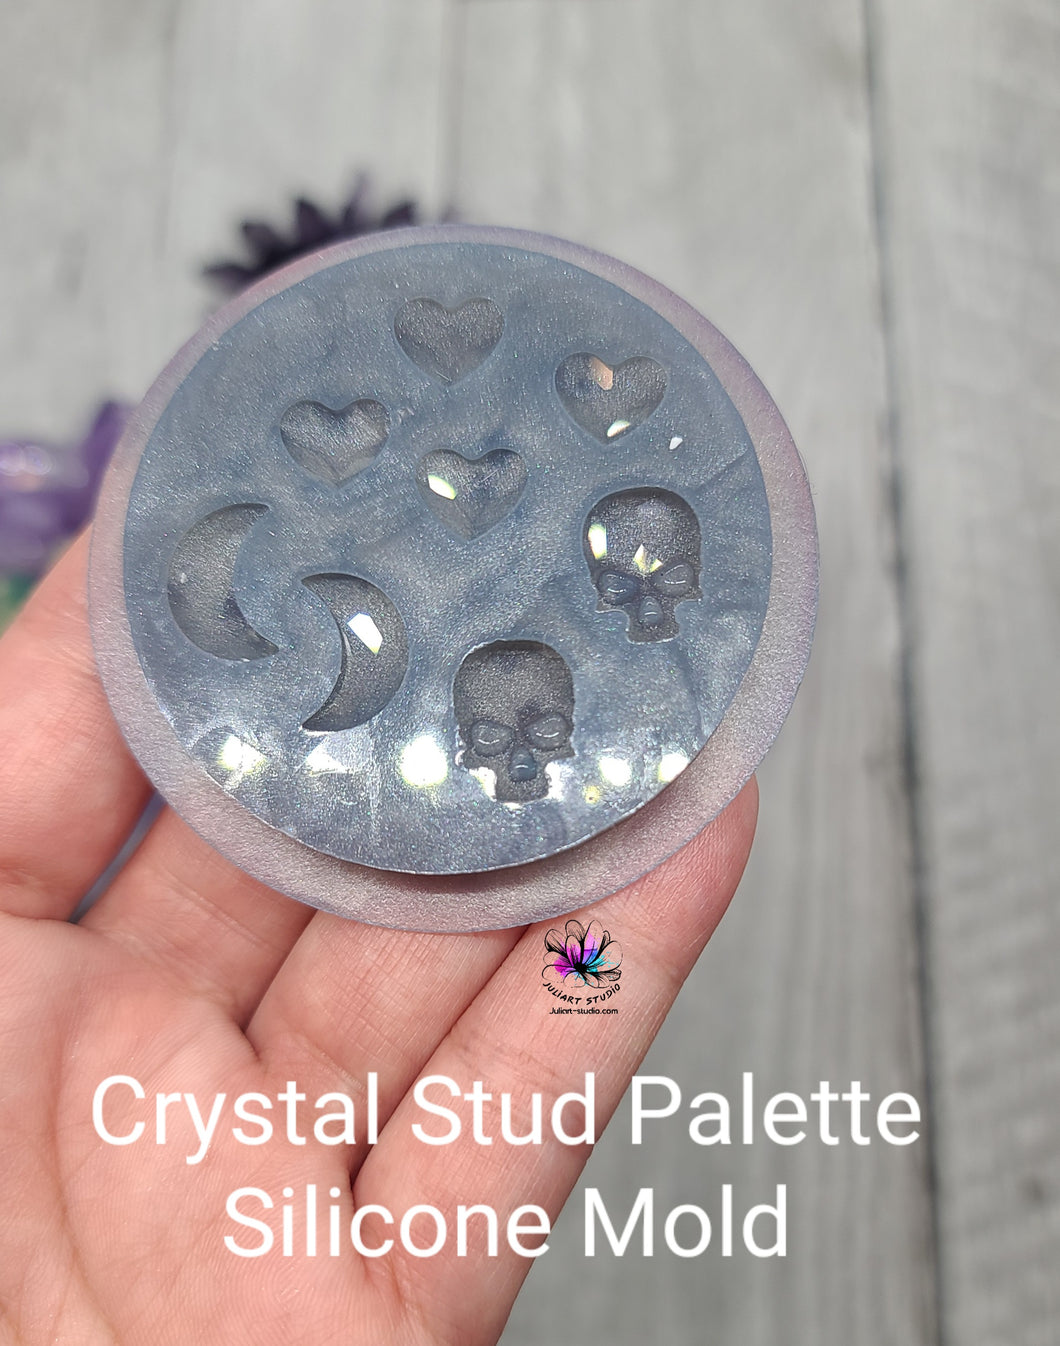 Crystal Stud Palette Silicone Mold for Resin casting